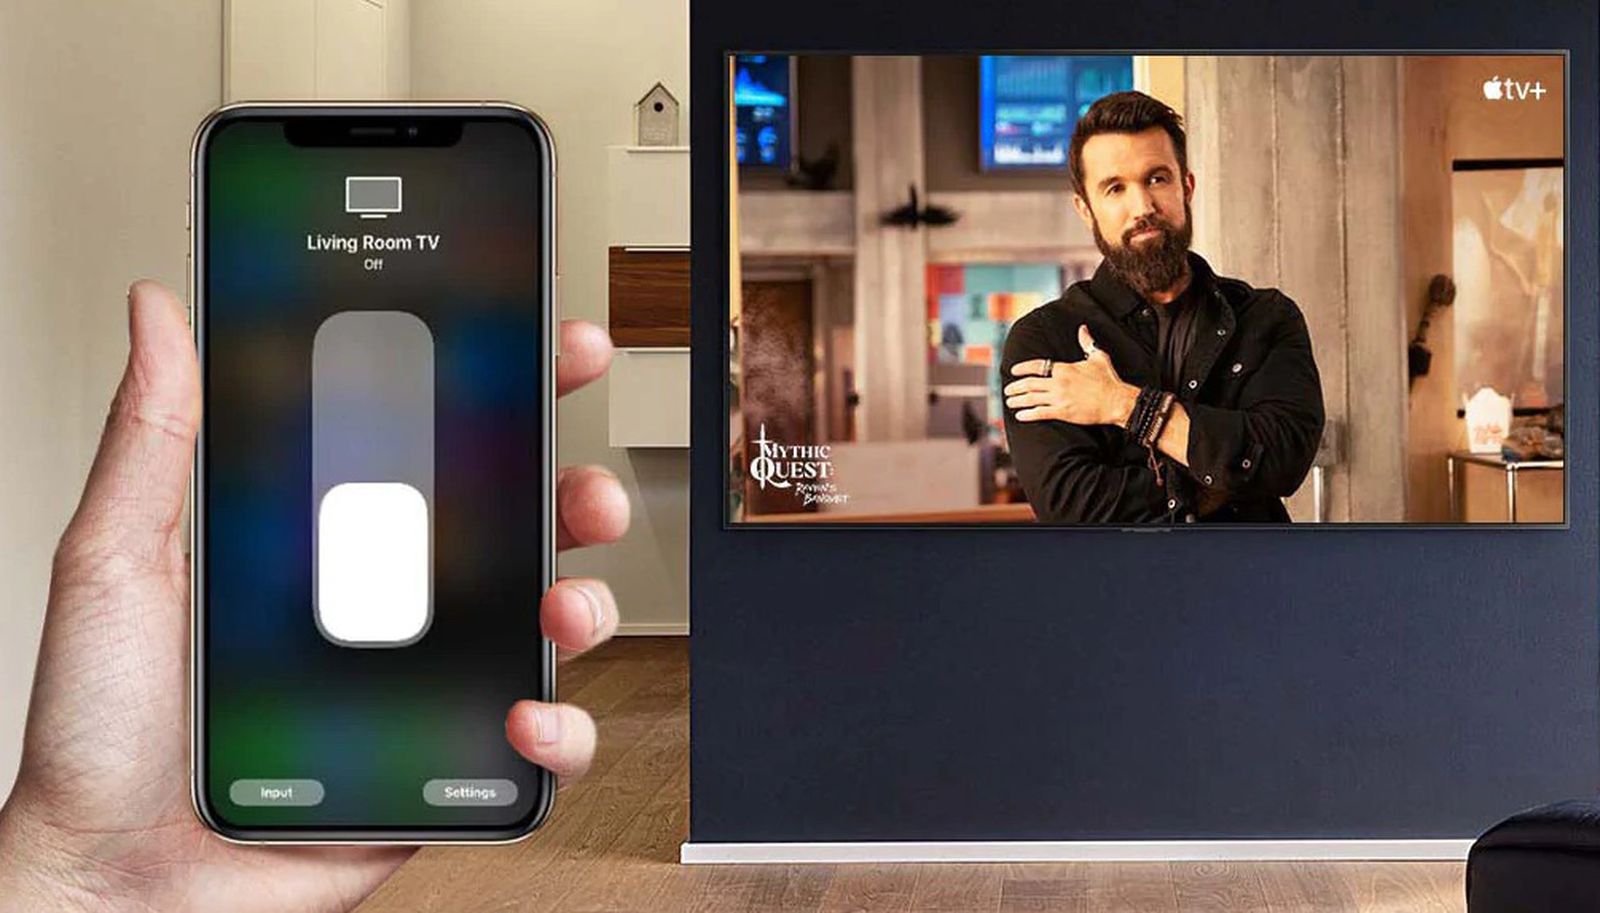 LG launches AirPlay 2 and HomeKit rollout until 2018 Smart TVs